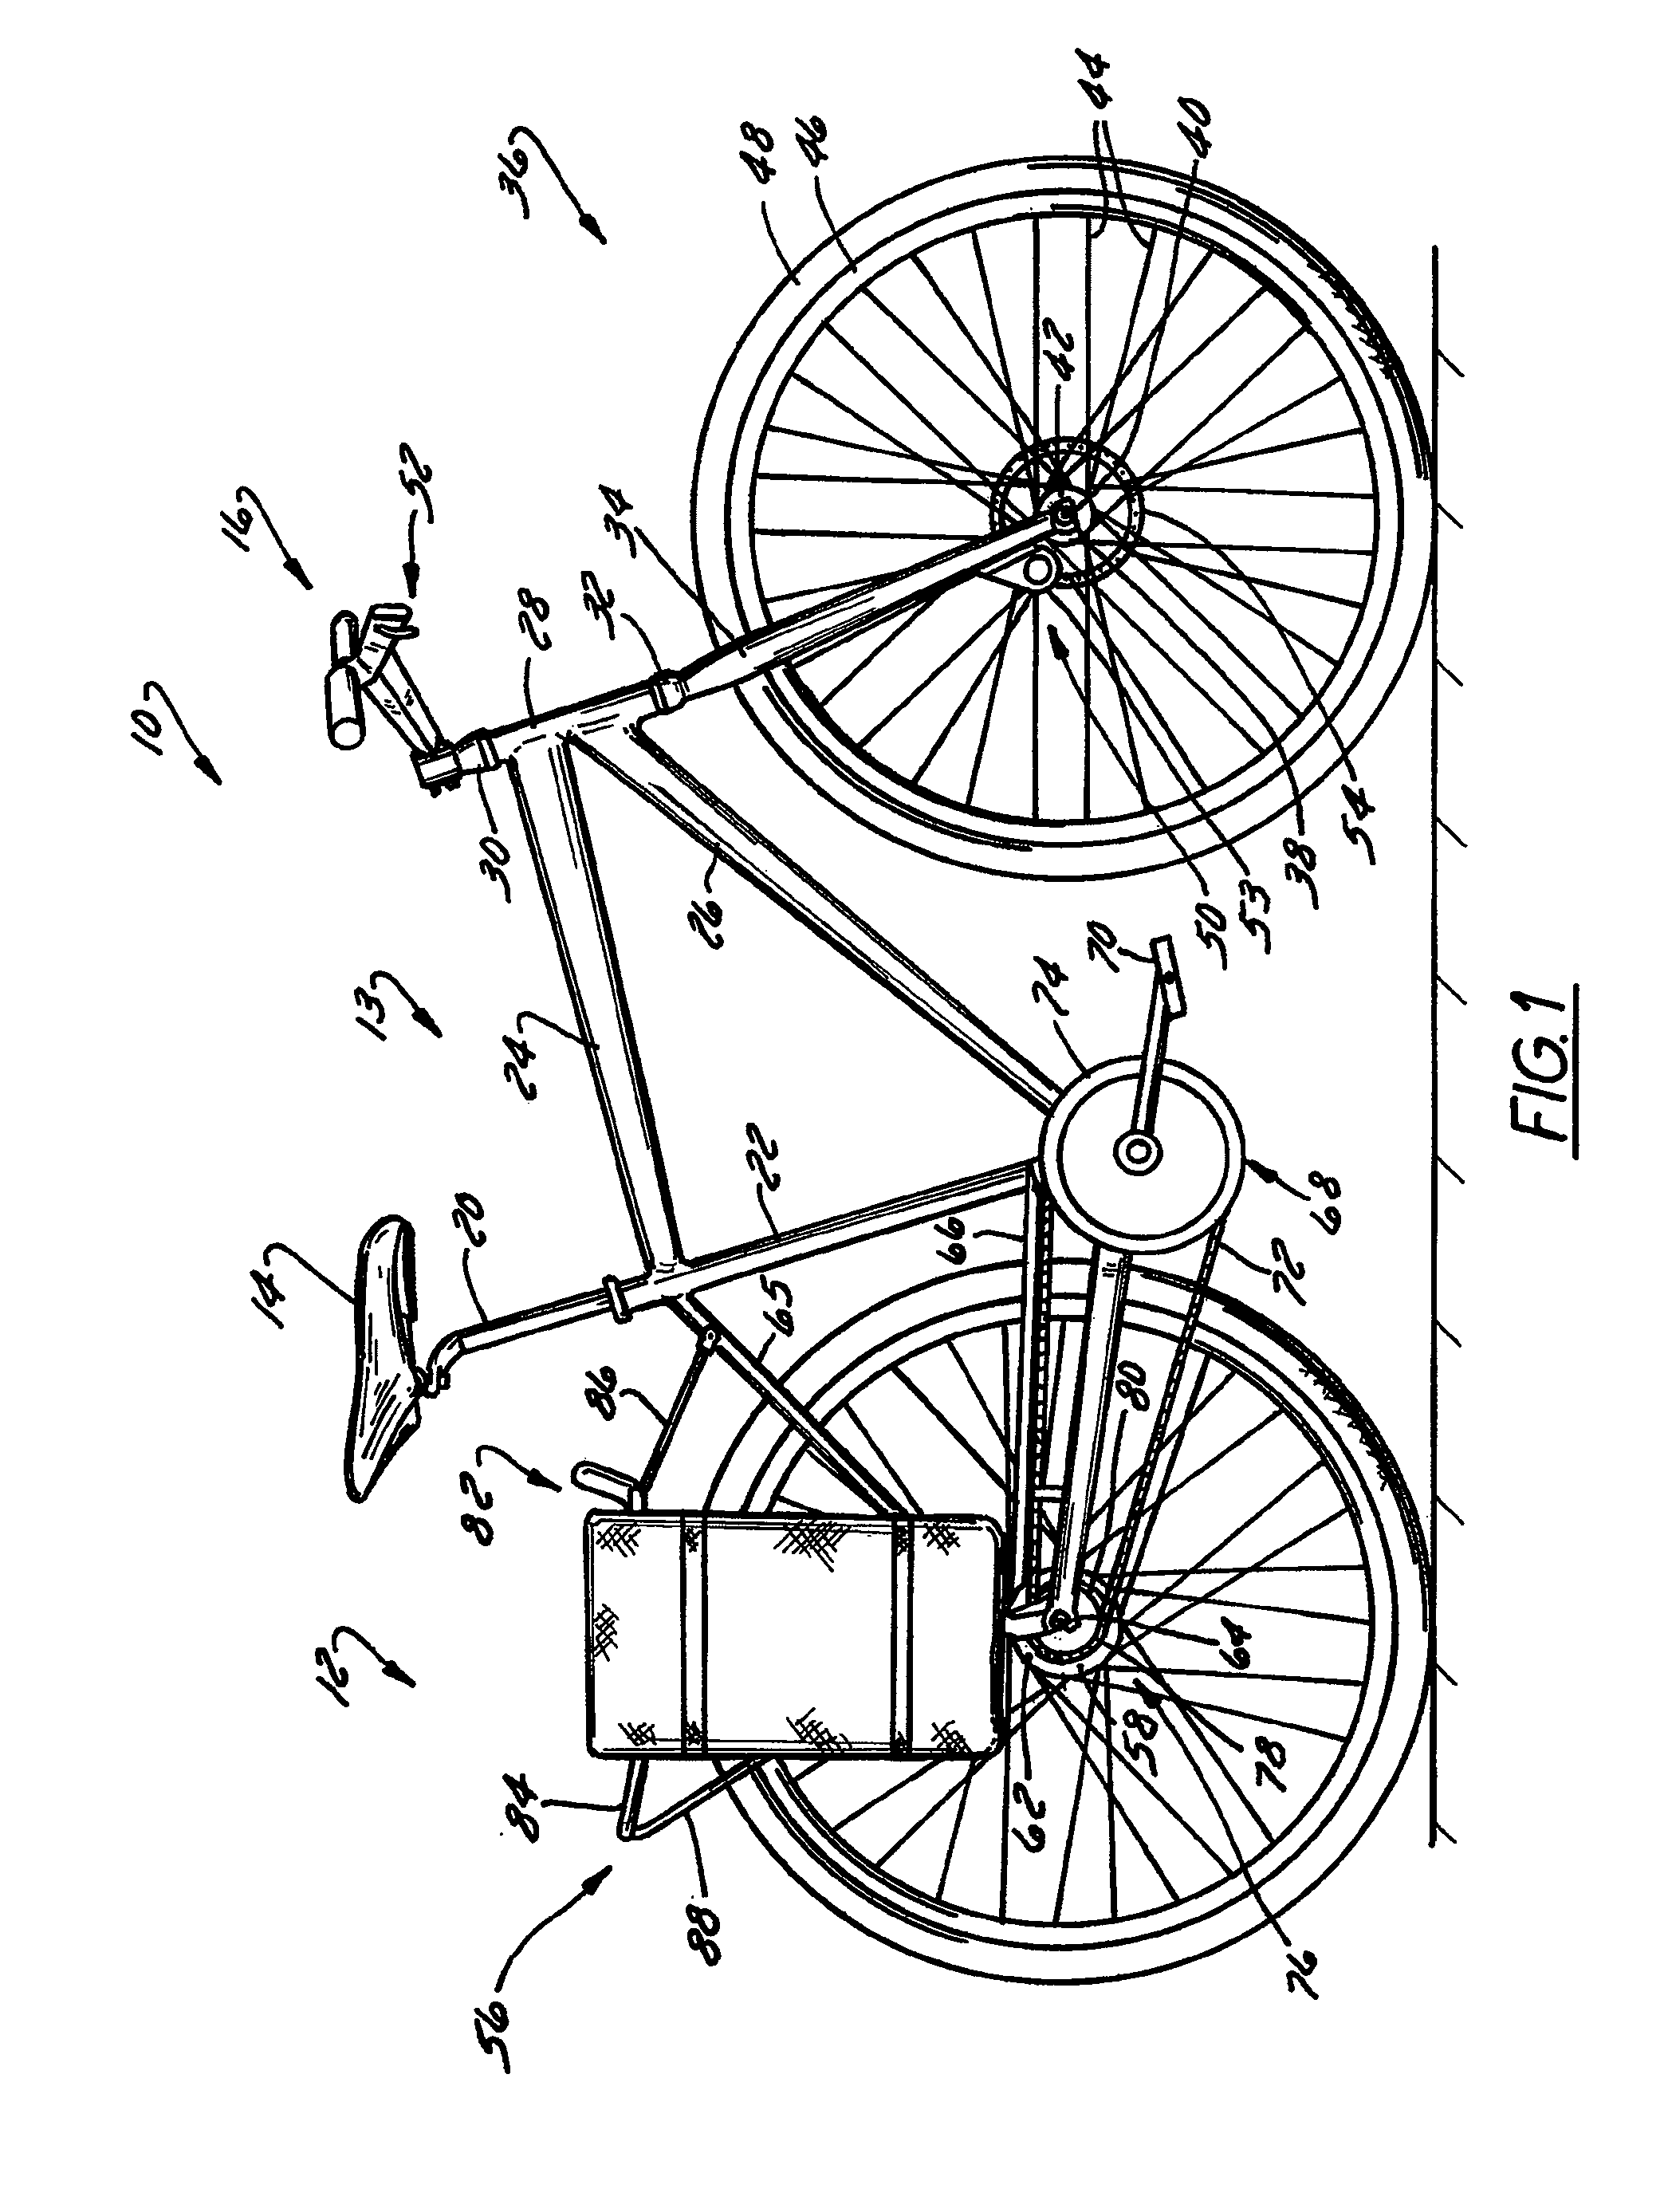 Bicycle pannier mounting system